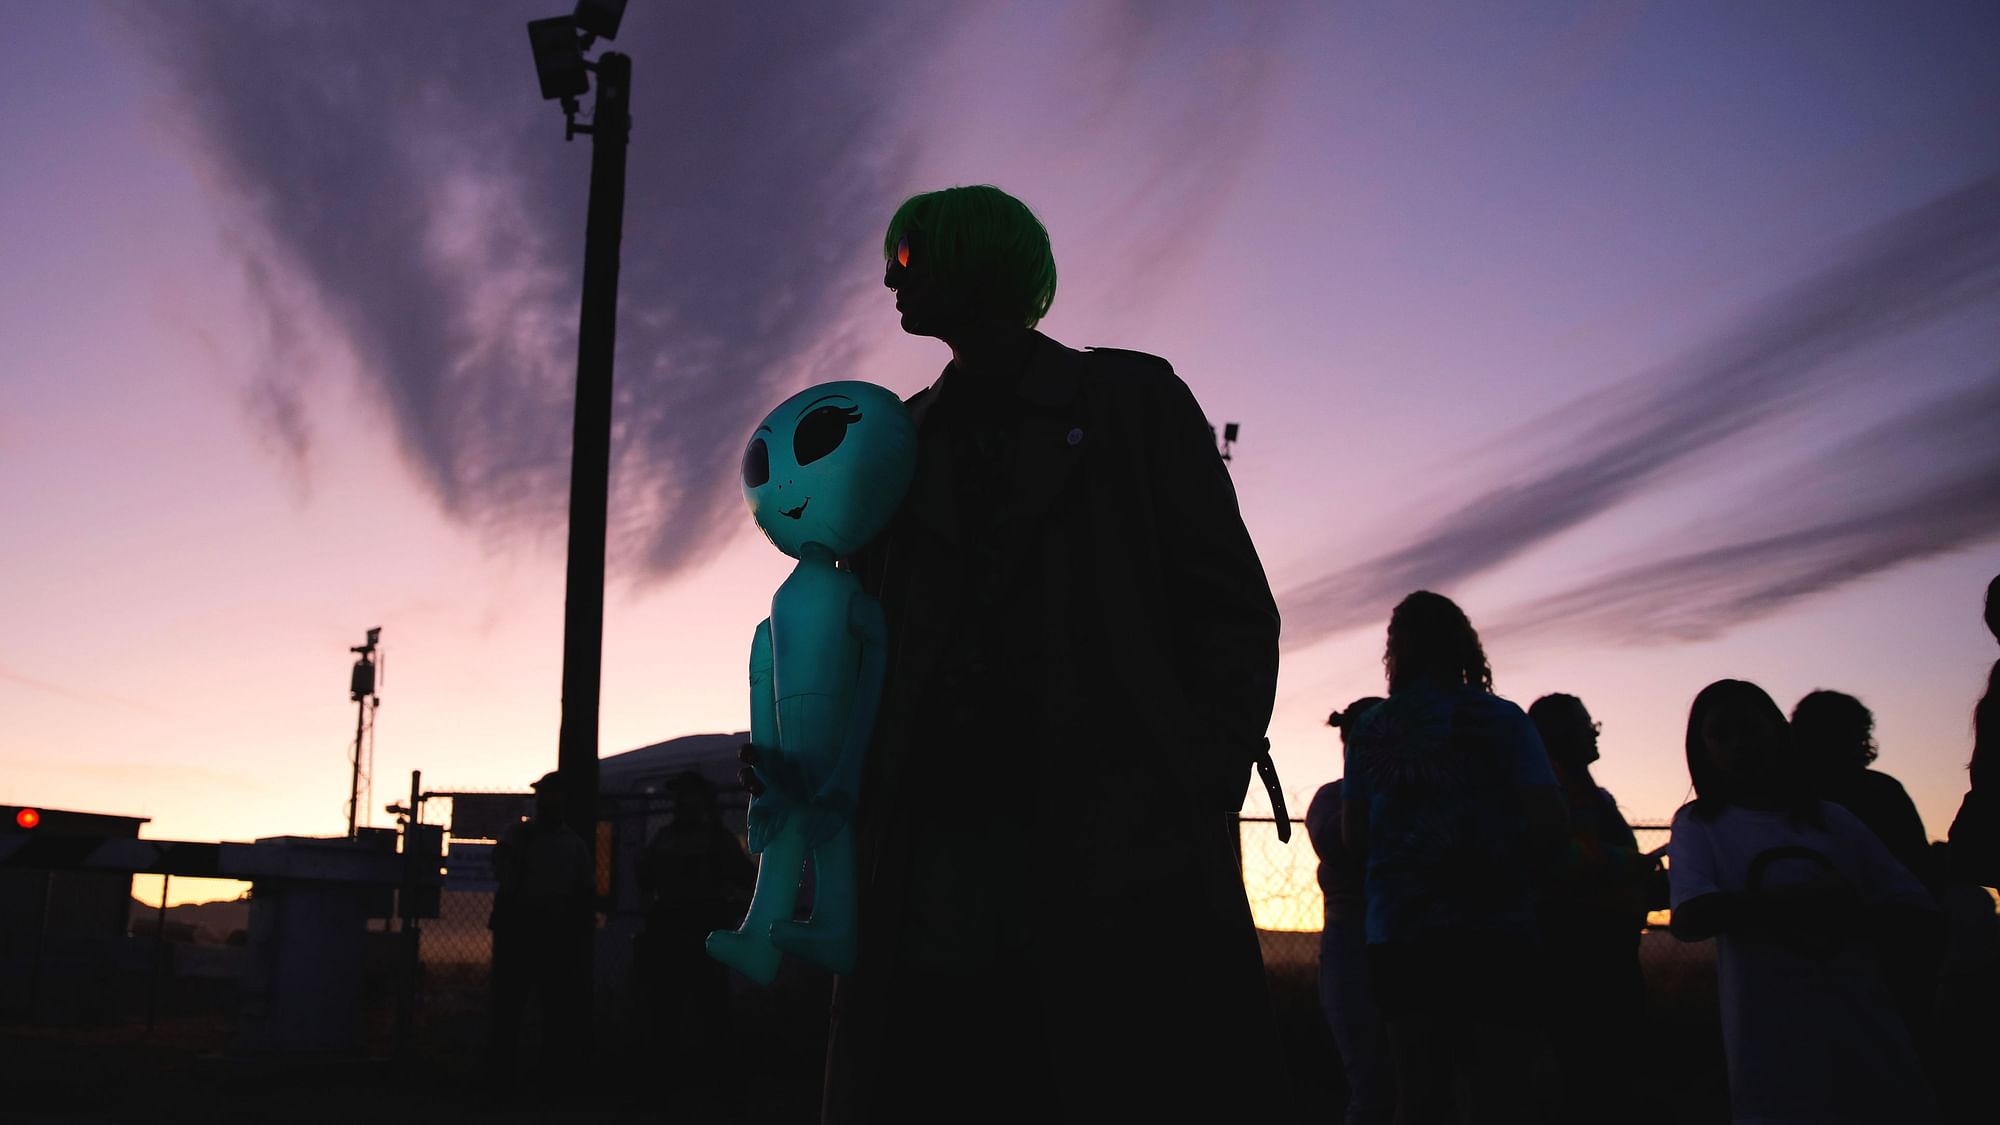 Chase Hansen holds an inflatable alien near an entrance to the Nevada Test and Training Range near Area 51, Friday